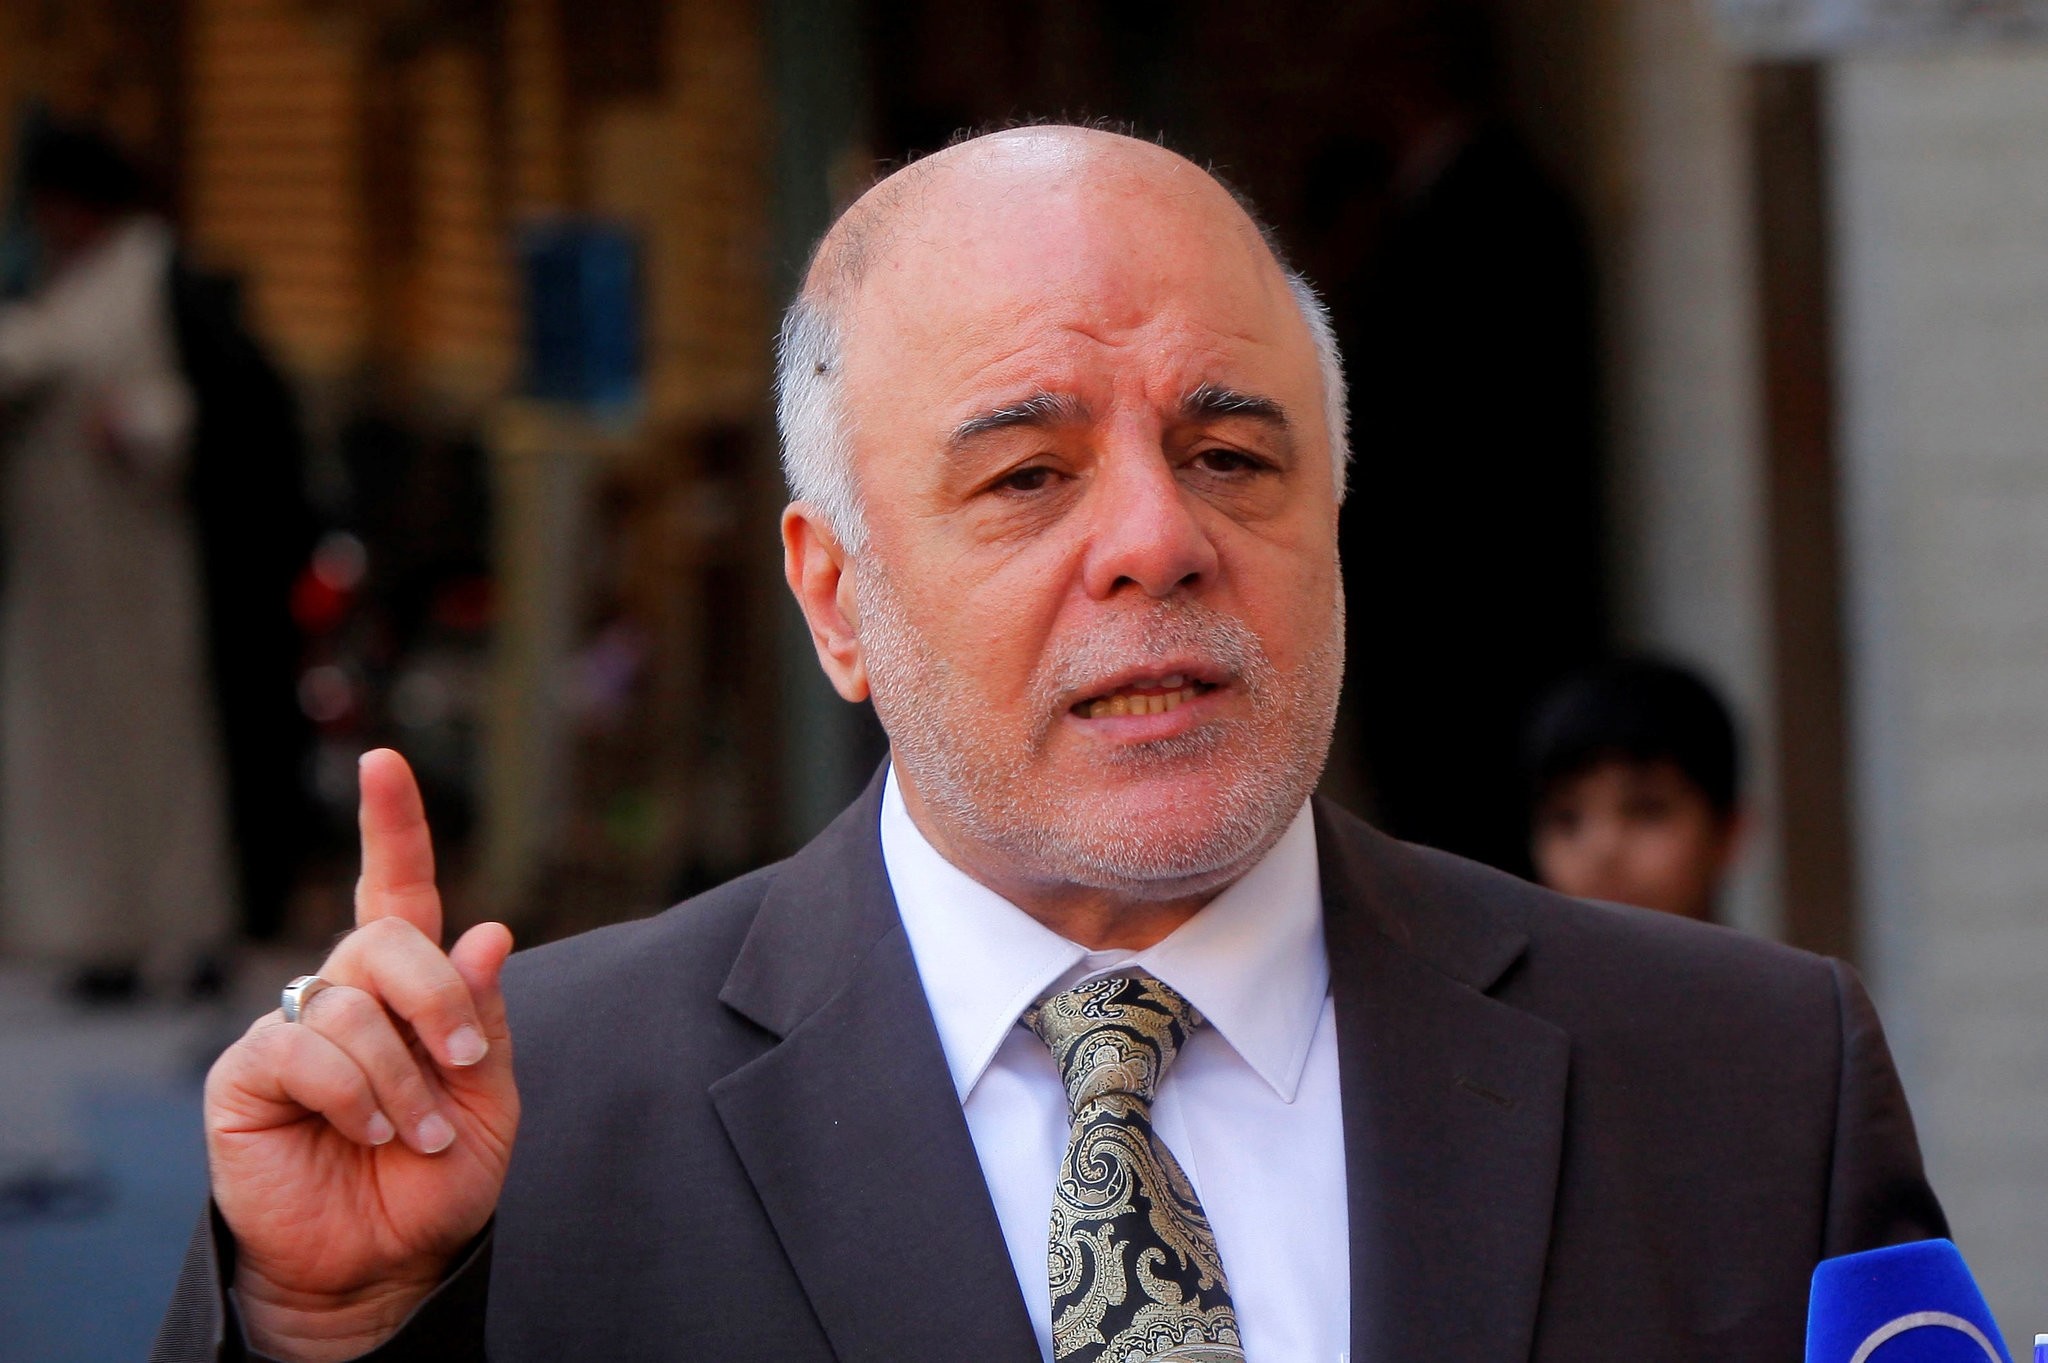 Iraqi Prime Minister Haider al-Abadi speaks to reporters after a meeting with the top Shiite cleric, Grand Ayatollah Ali al-Sistani, in the Shiite holy city of Najaf, south of Baghdad, October 20, 2014. (REUTERS Photo)